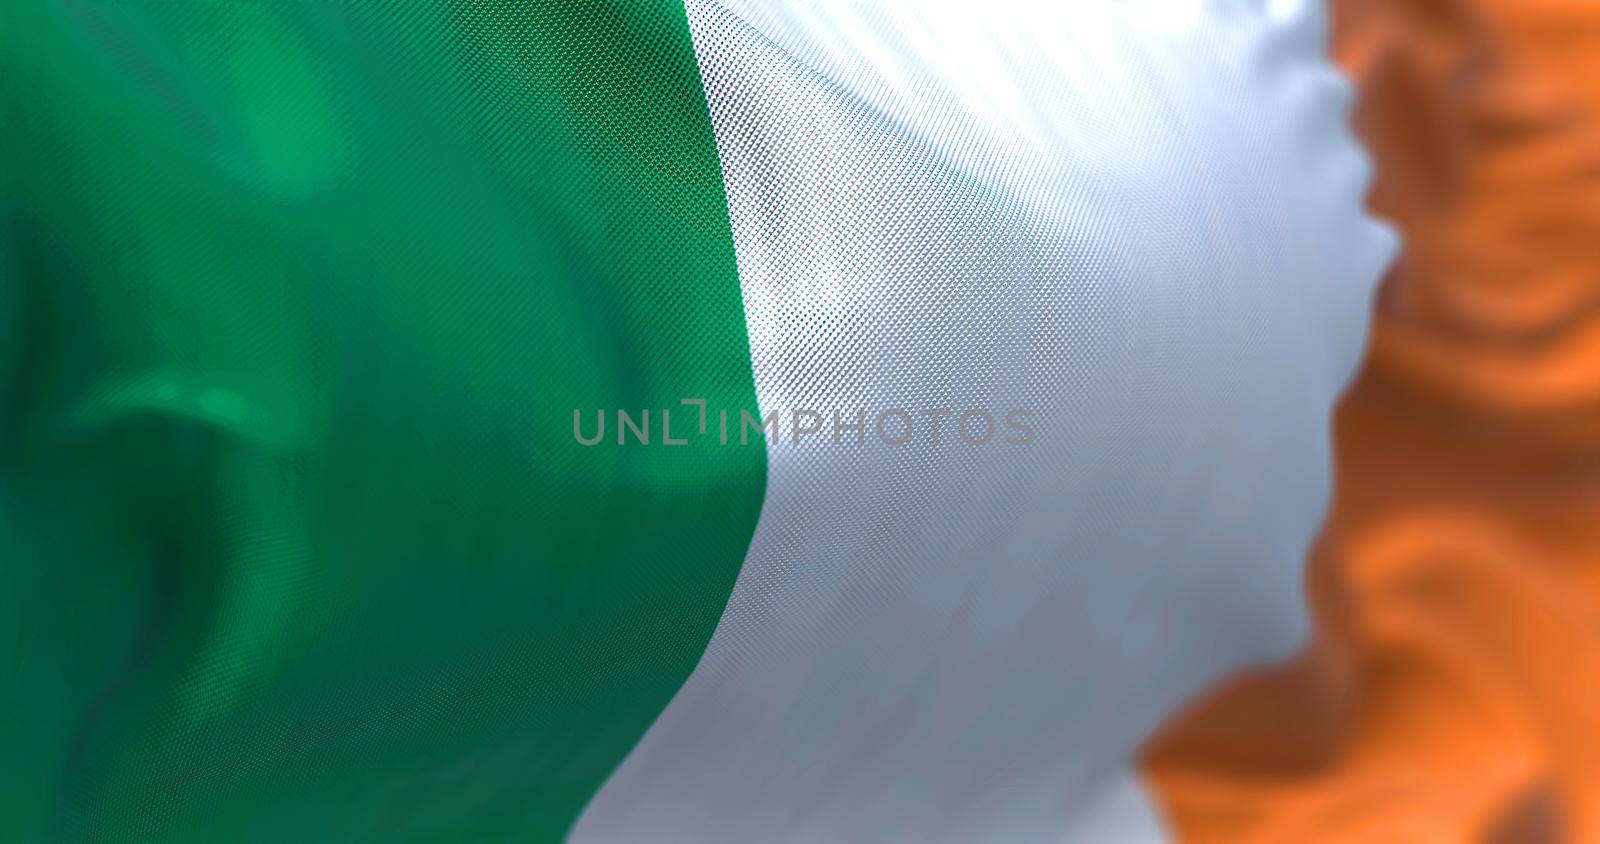 Close-up view of the irish national flag waving in the wind. Ireland is an island in the North Atlantic Ocean, in north-western Europe. Fabric textured background. Selective focus